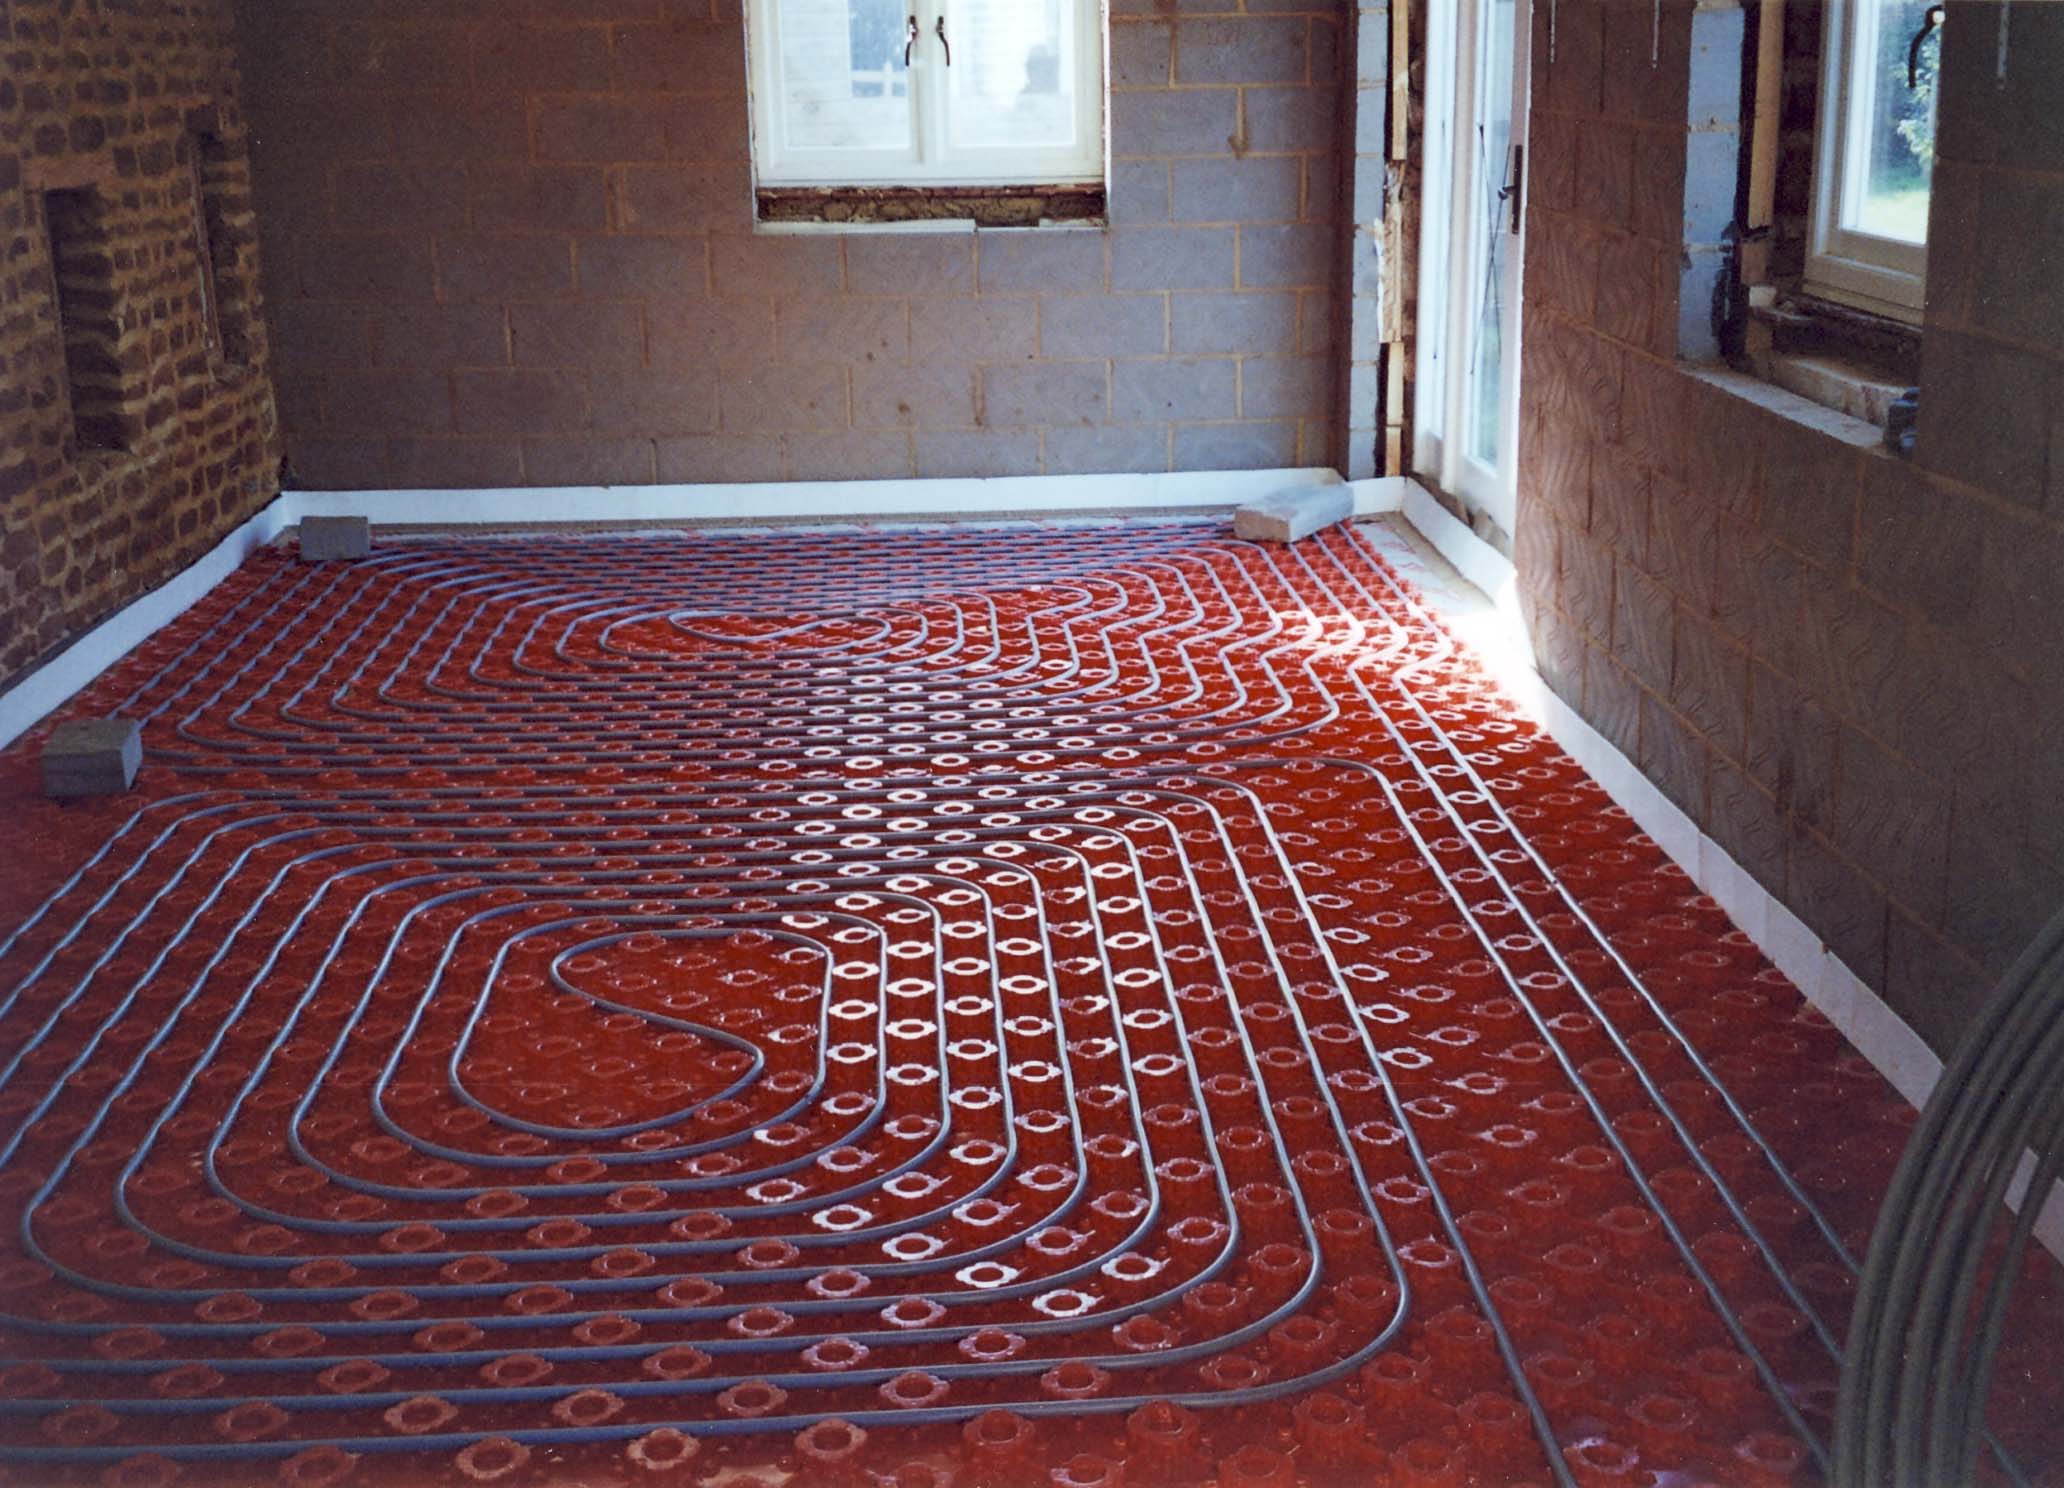 Polypipe underfloor heating system